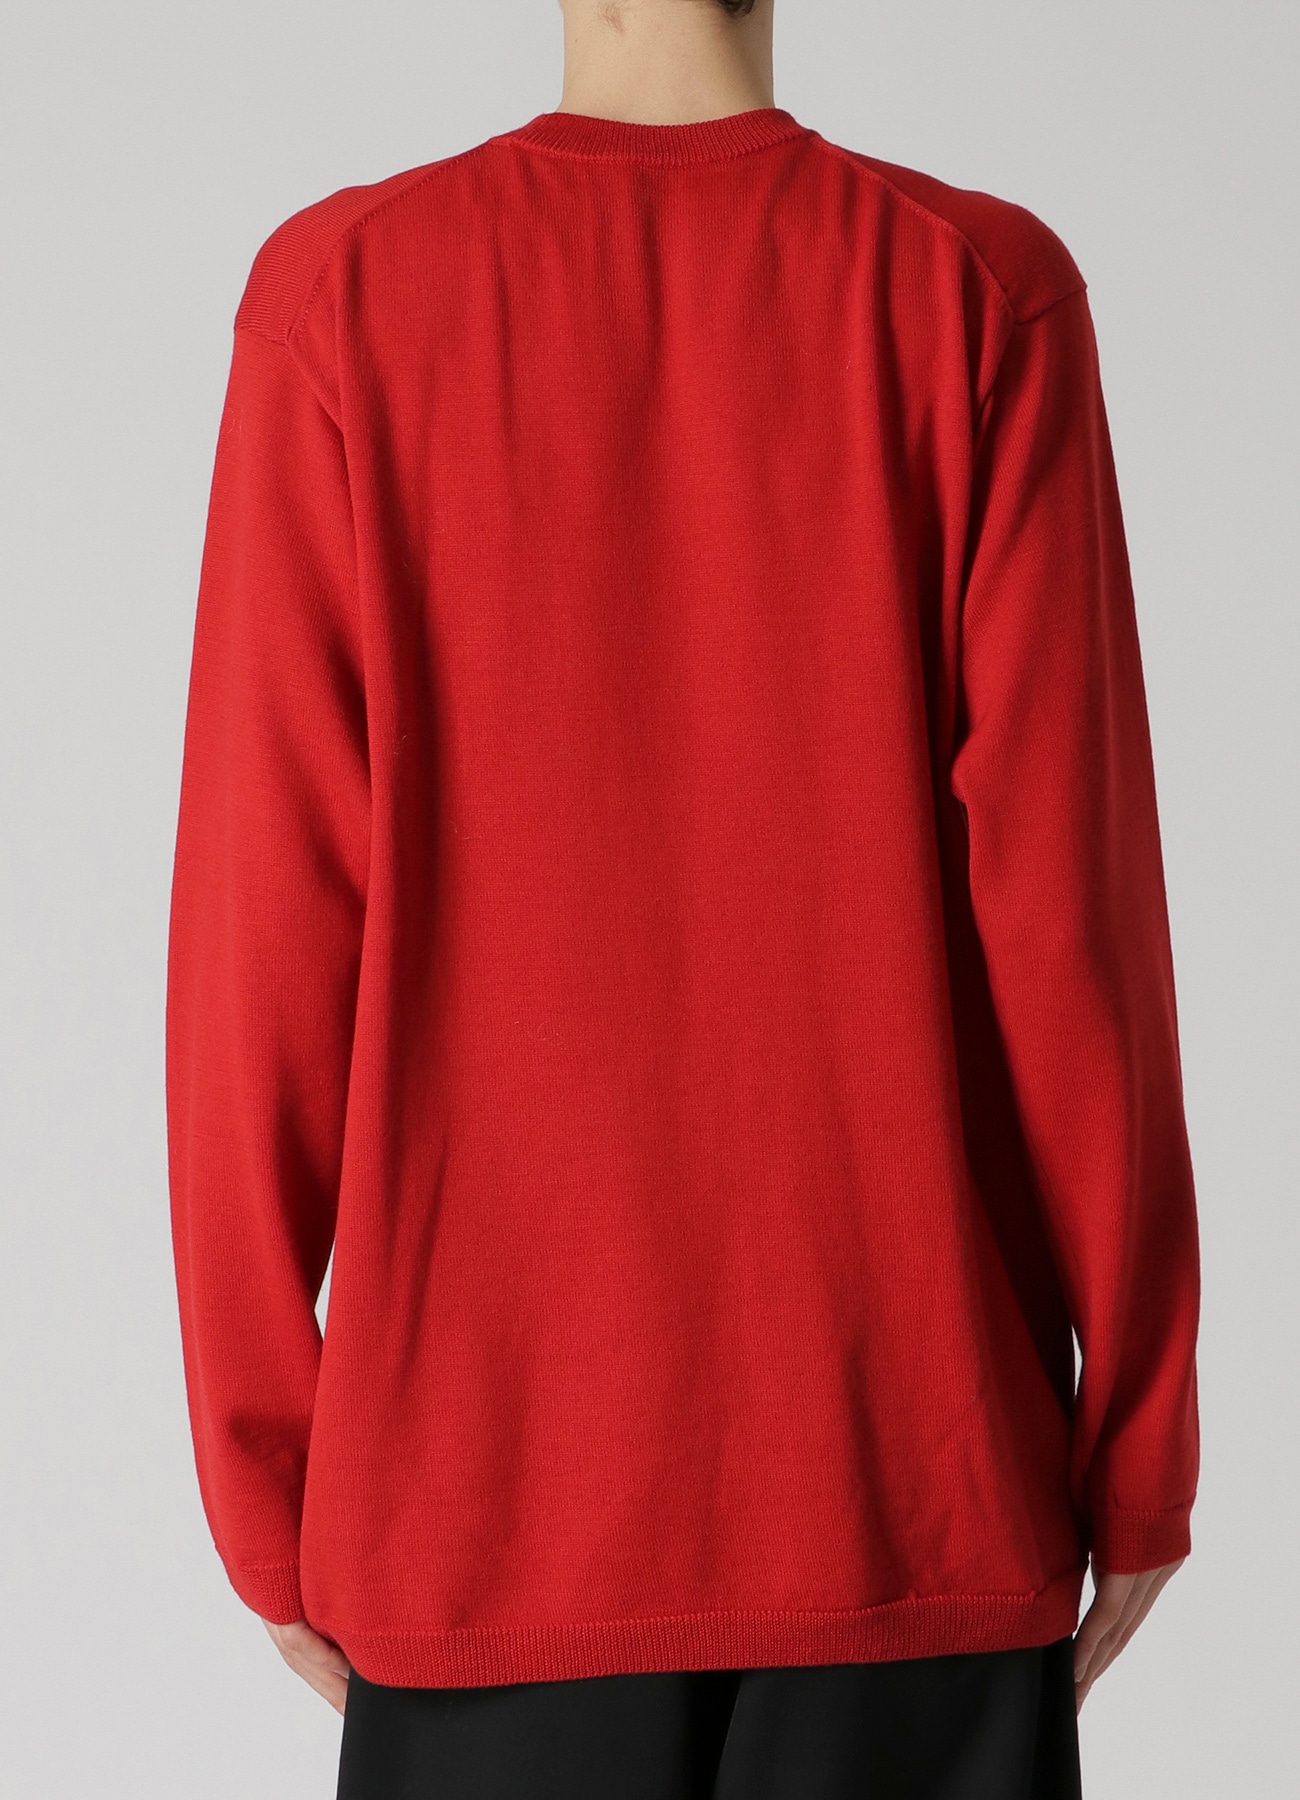 12G JERSEY ROUND NECK KNIT(M RED): Y's for men｜WILDSIDE YOHJI ...